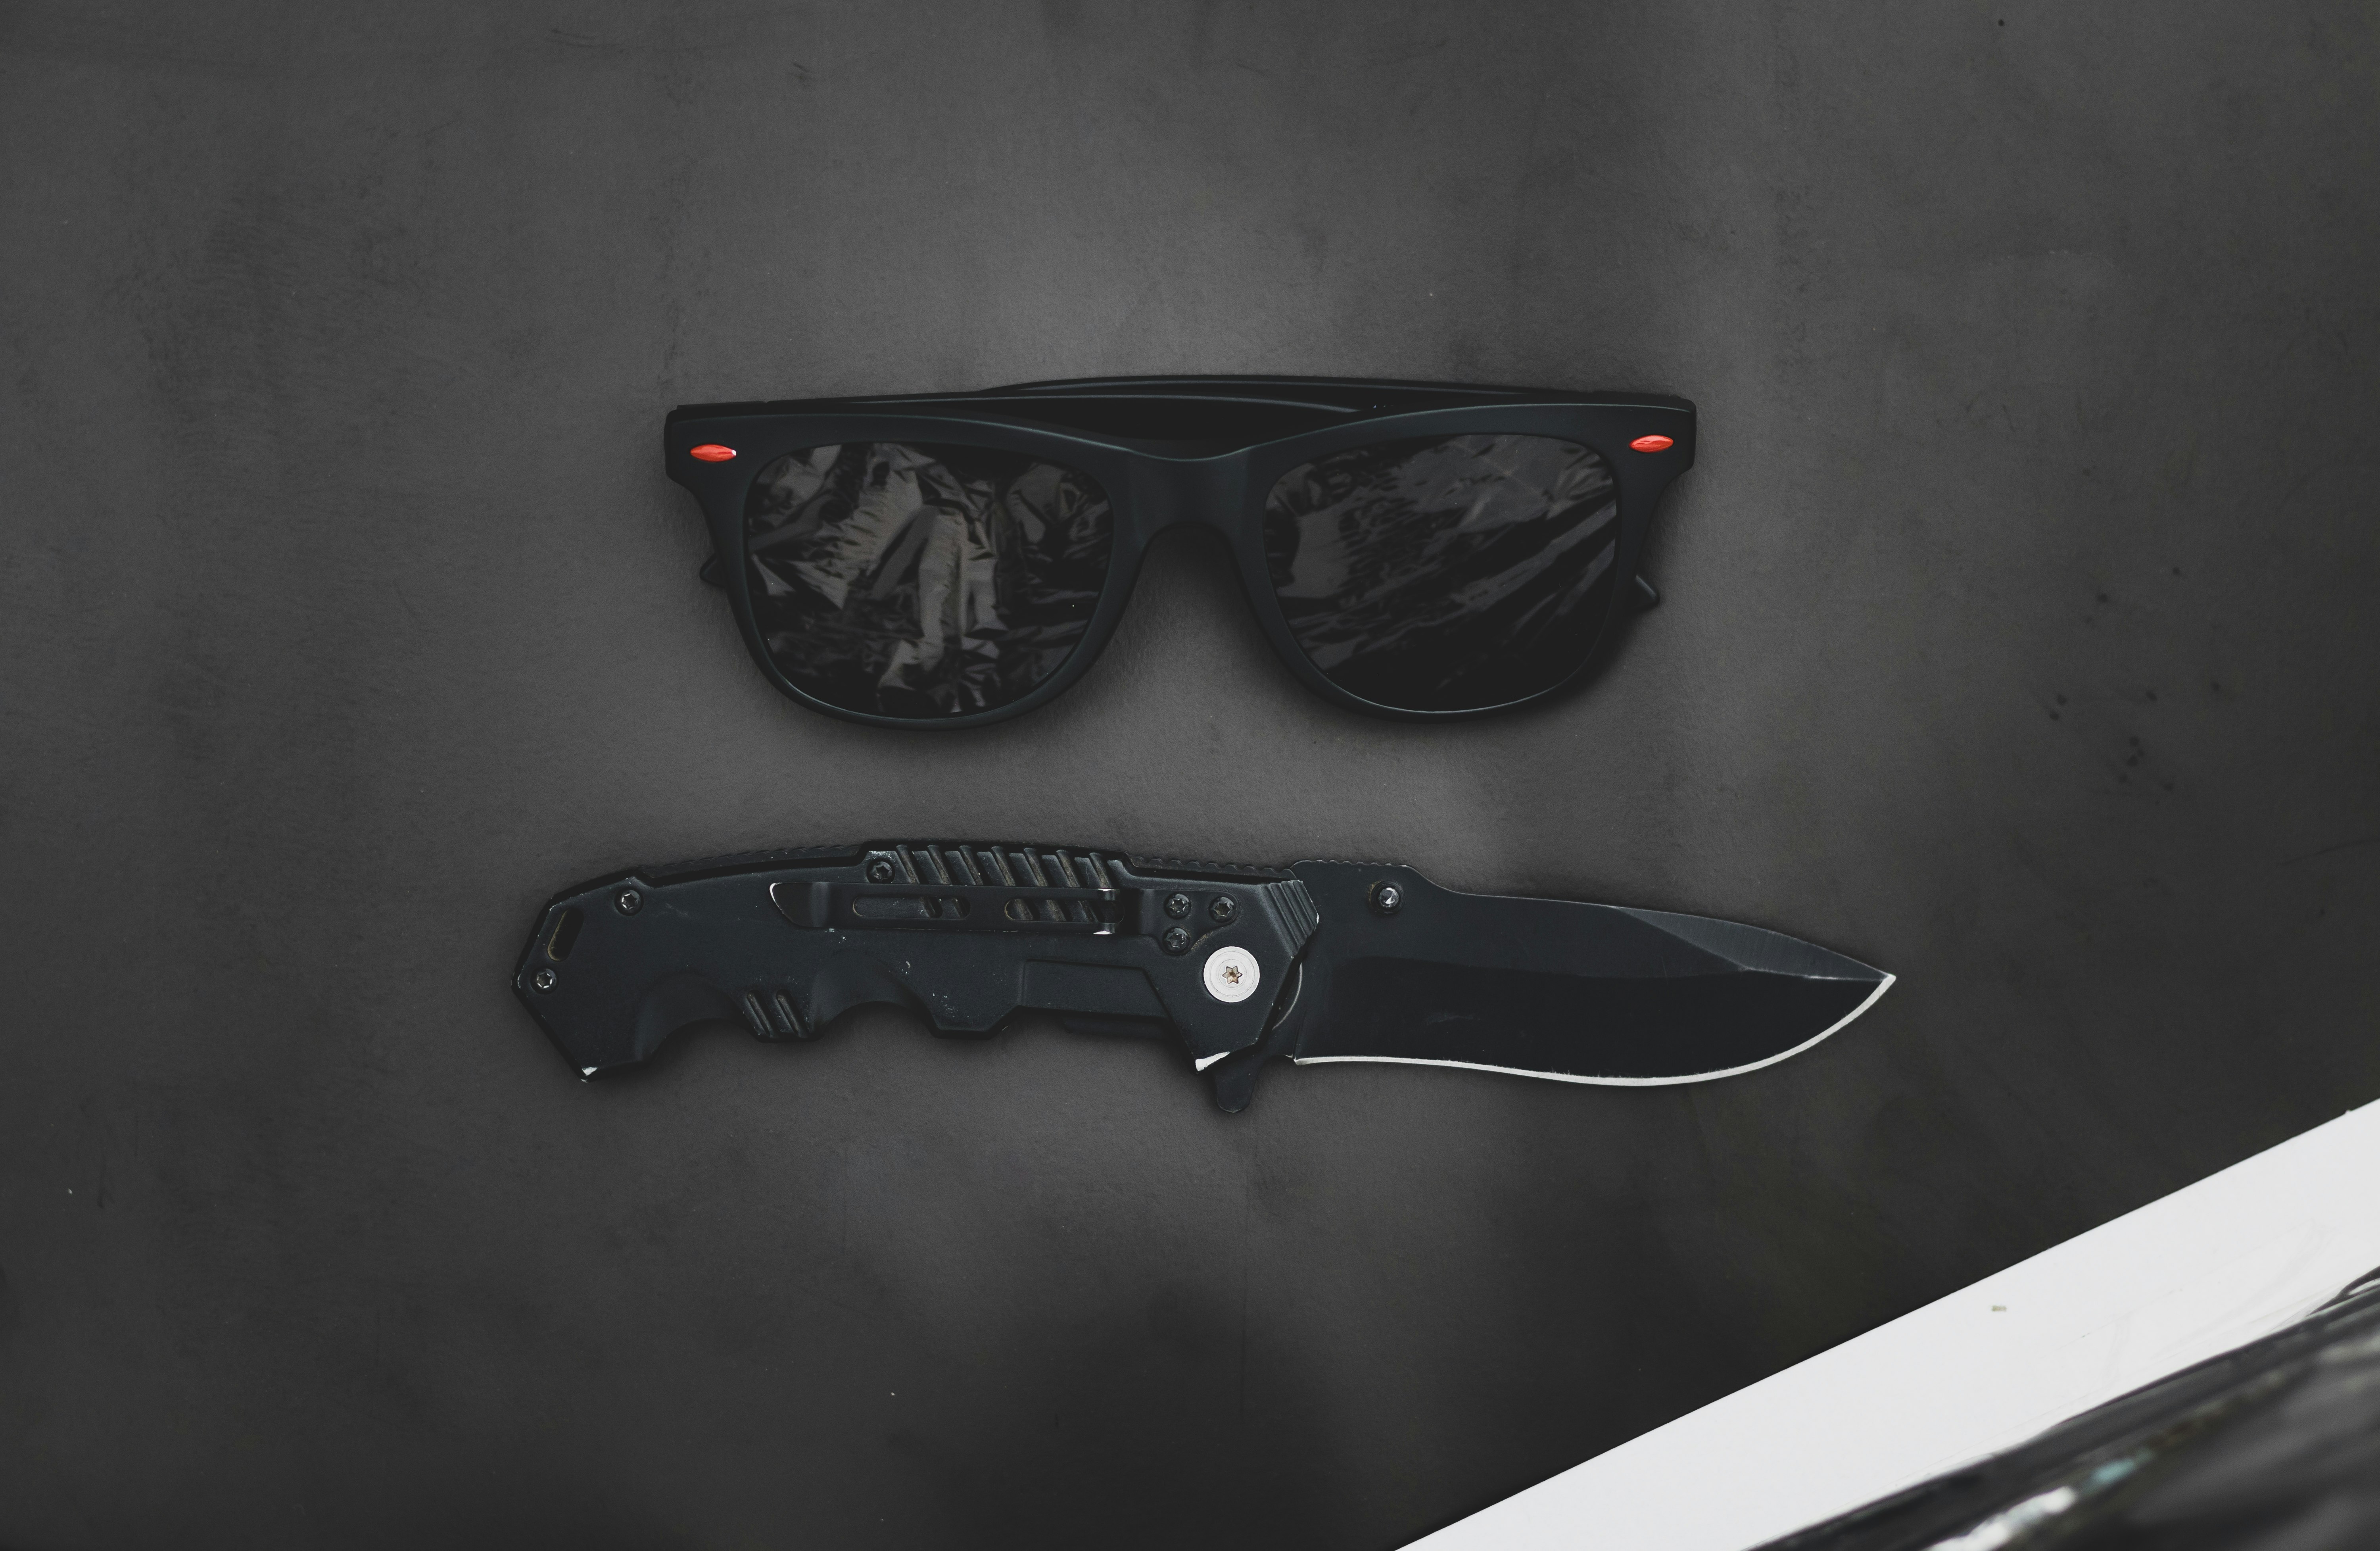 Sunglass and pocket army knife on a wooden background with a retro look.